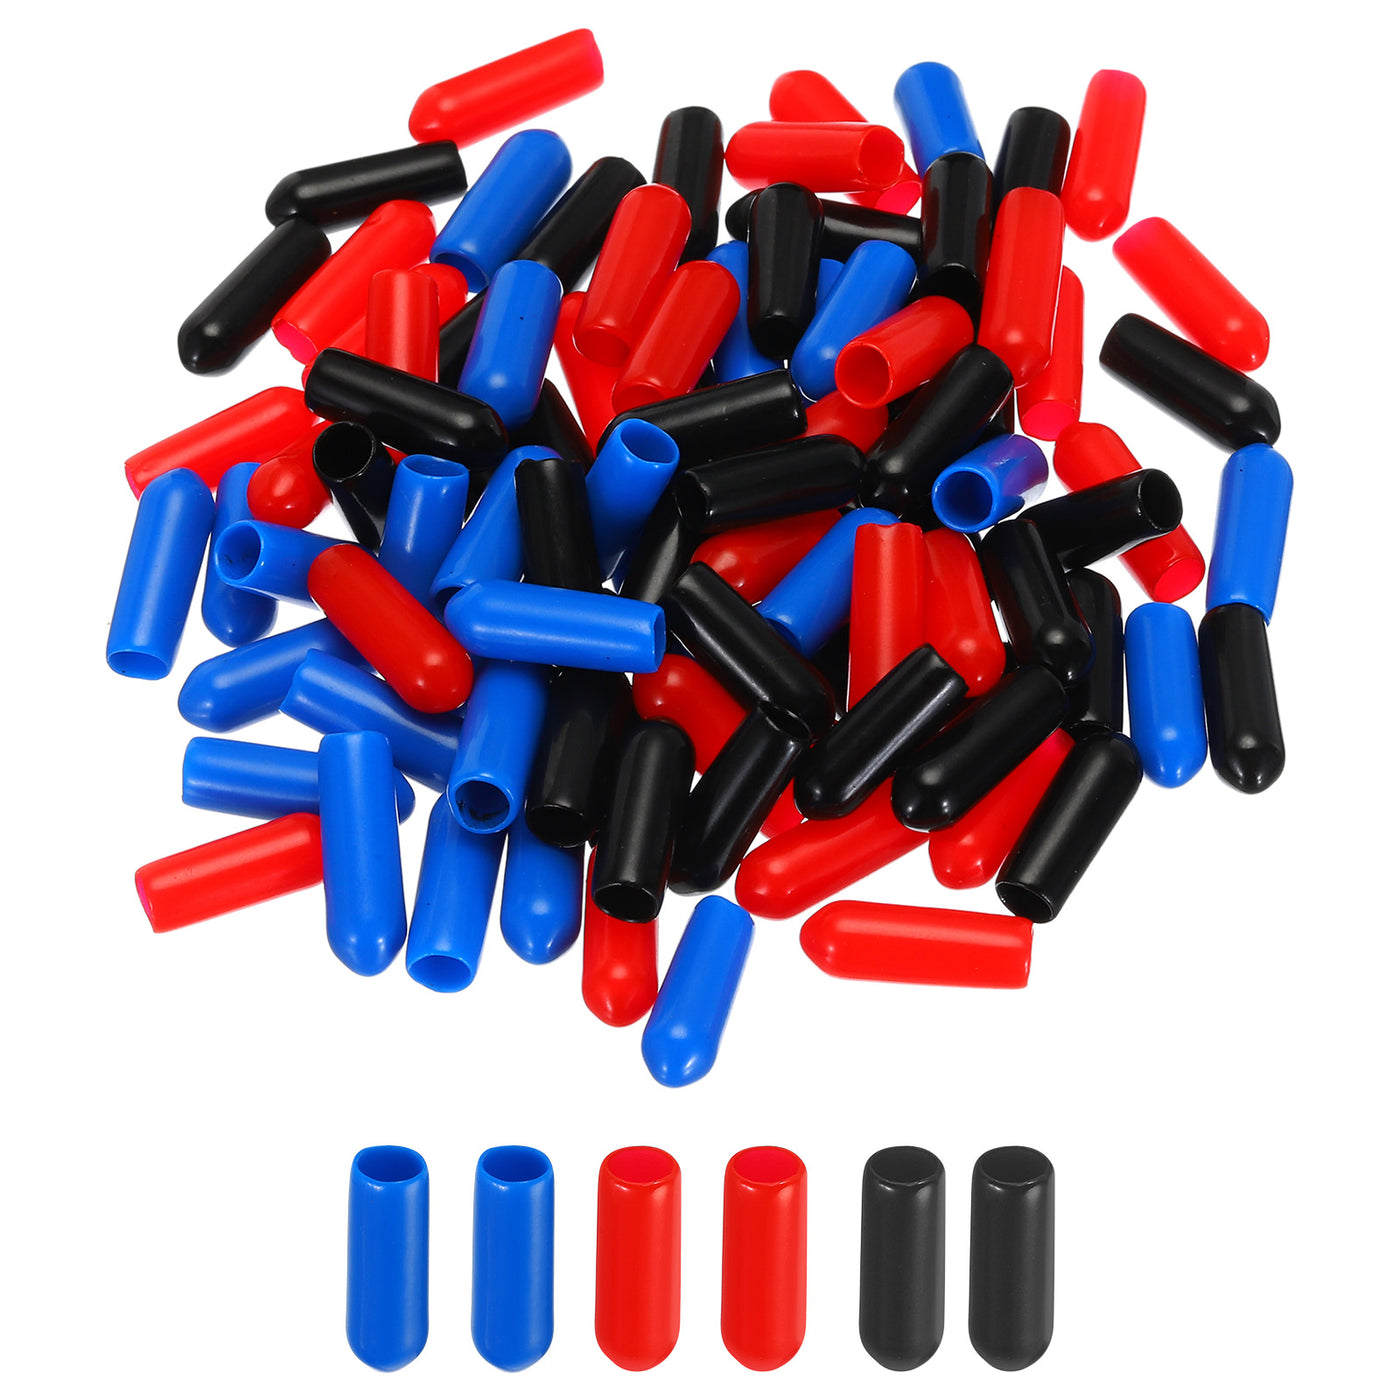 uxcell Uxcell 90pcs Rubber End Caps 4.5mm ID Vinyl PVC Round Tube Bolt Cap Cover Screw Thread Protectors, Black Red Blue